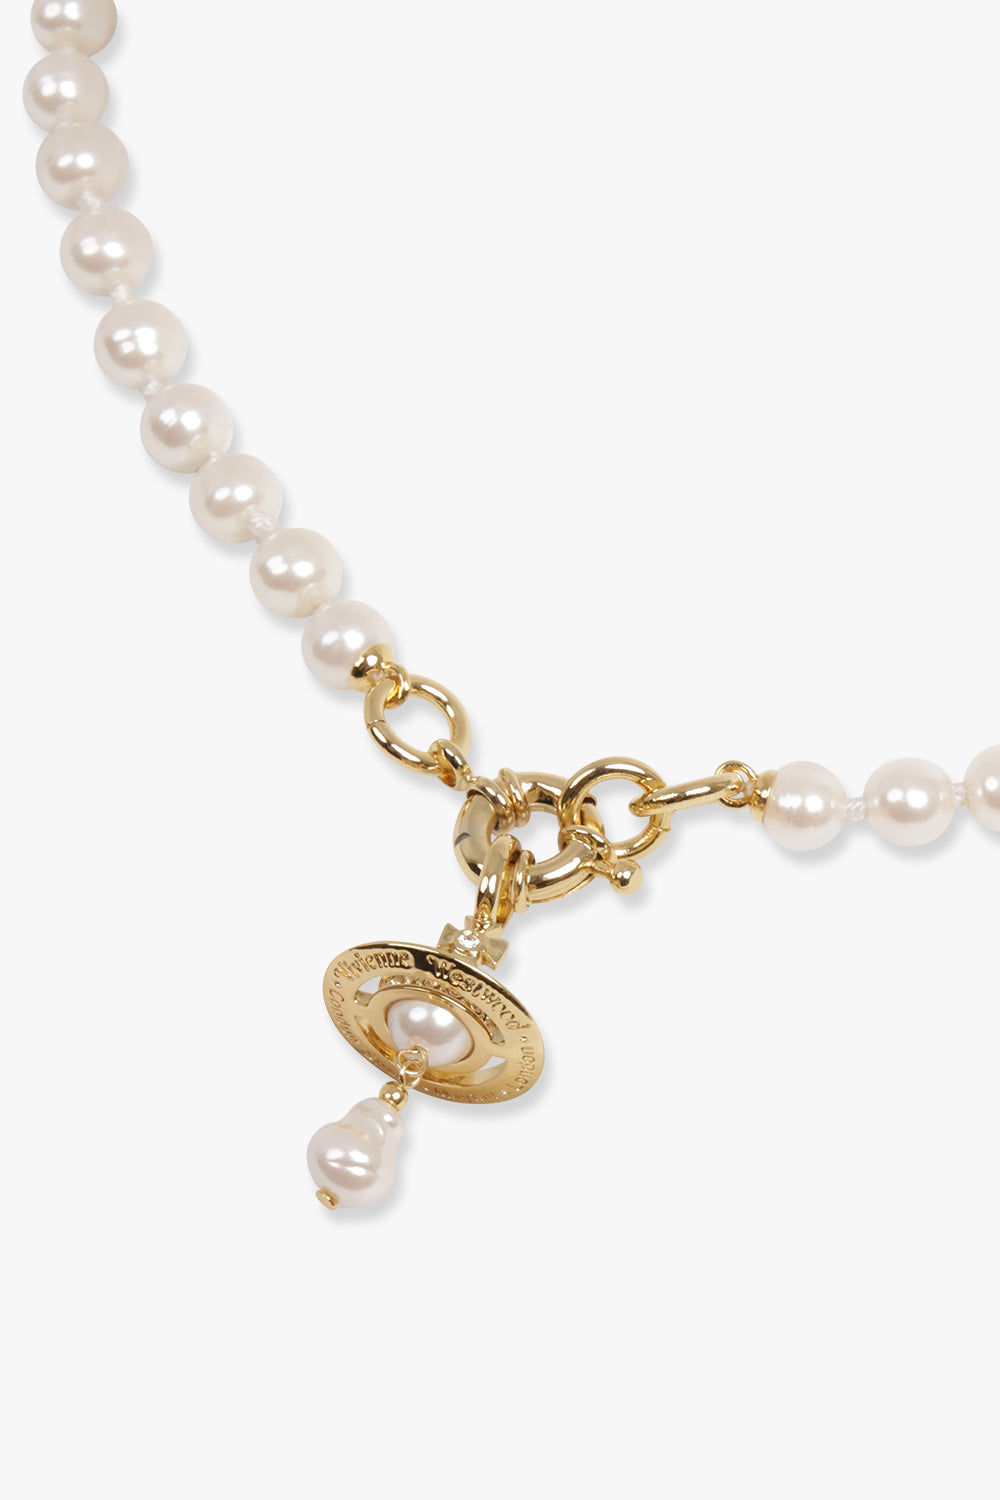 VIVIENNE WESTWOOD JEWELLRY GOLD / GOLD ALEKSA PEARL NECKLACE | CREAM ROSE PEARL/GOLD